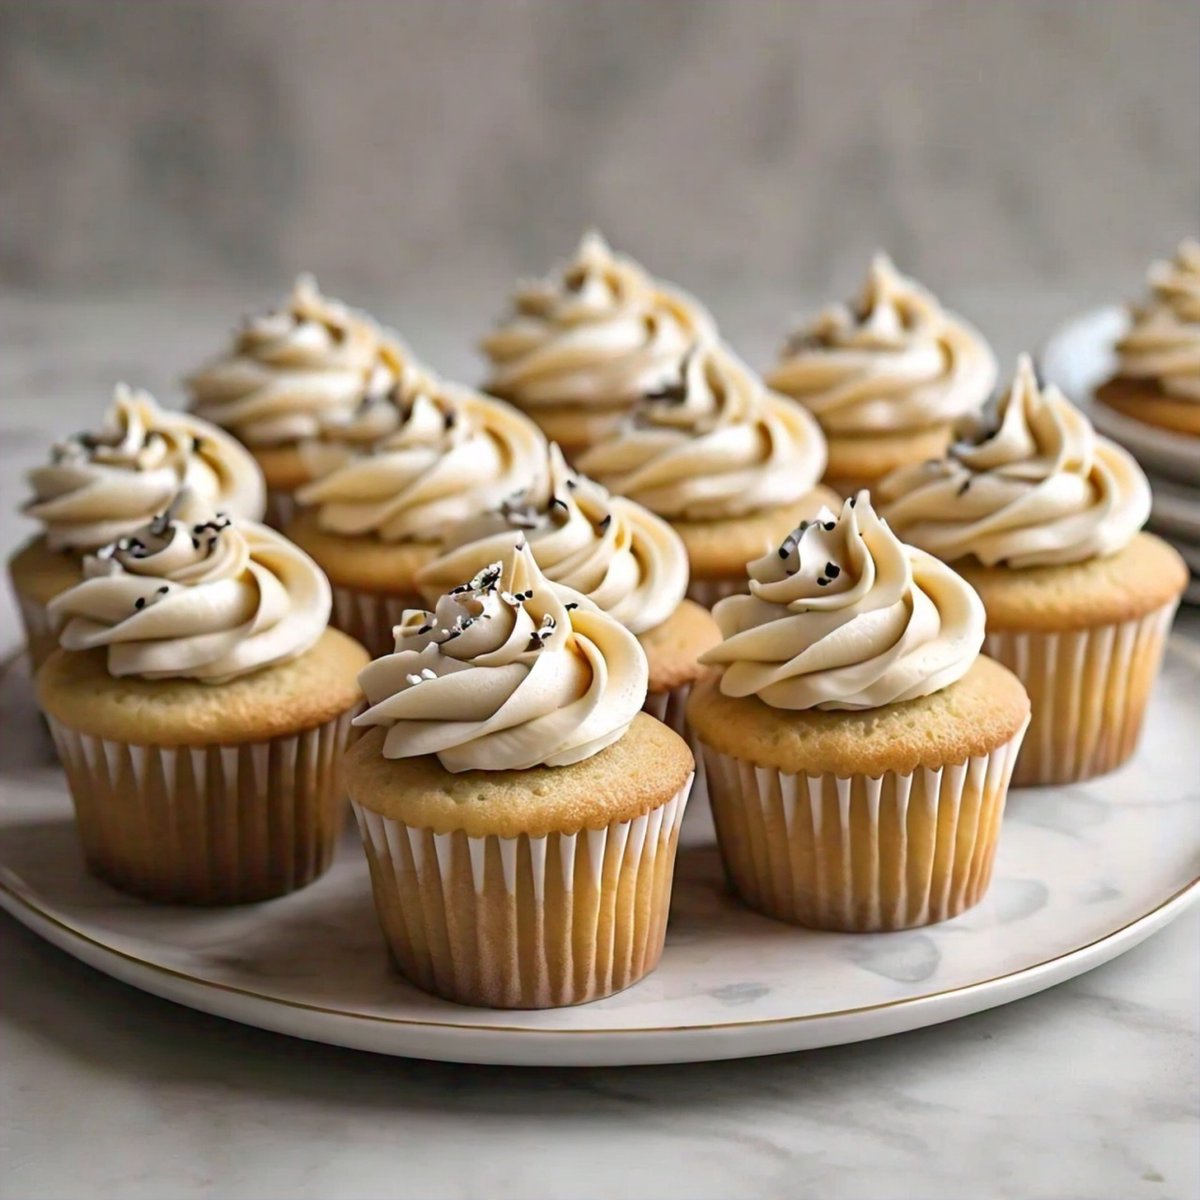 🧁Vanilla Cupcakes:

- Cream butter and sugar, then beat in eggs and vanilla.

- Sift together dry ingredients and gradually add to wet ingredients alternately with milk.

- Divide batter into cupcake liners and bake until done.

#easybaking #recipeoftheday #dailytrophy